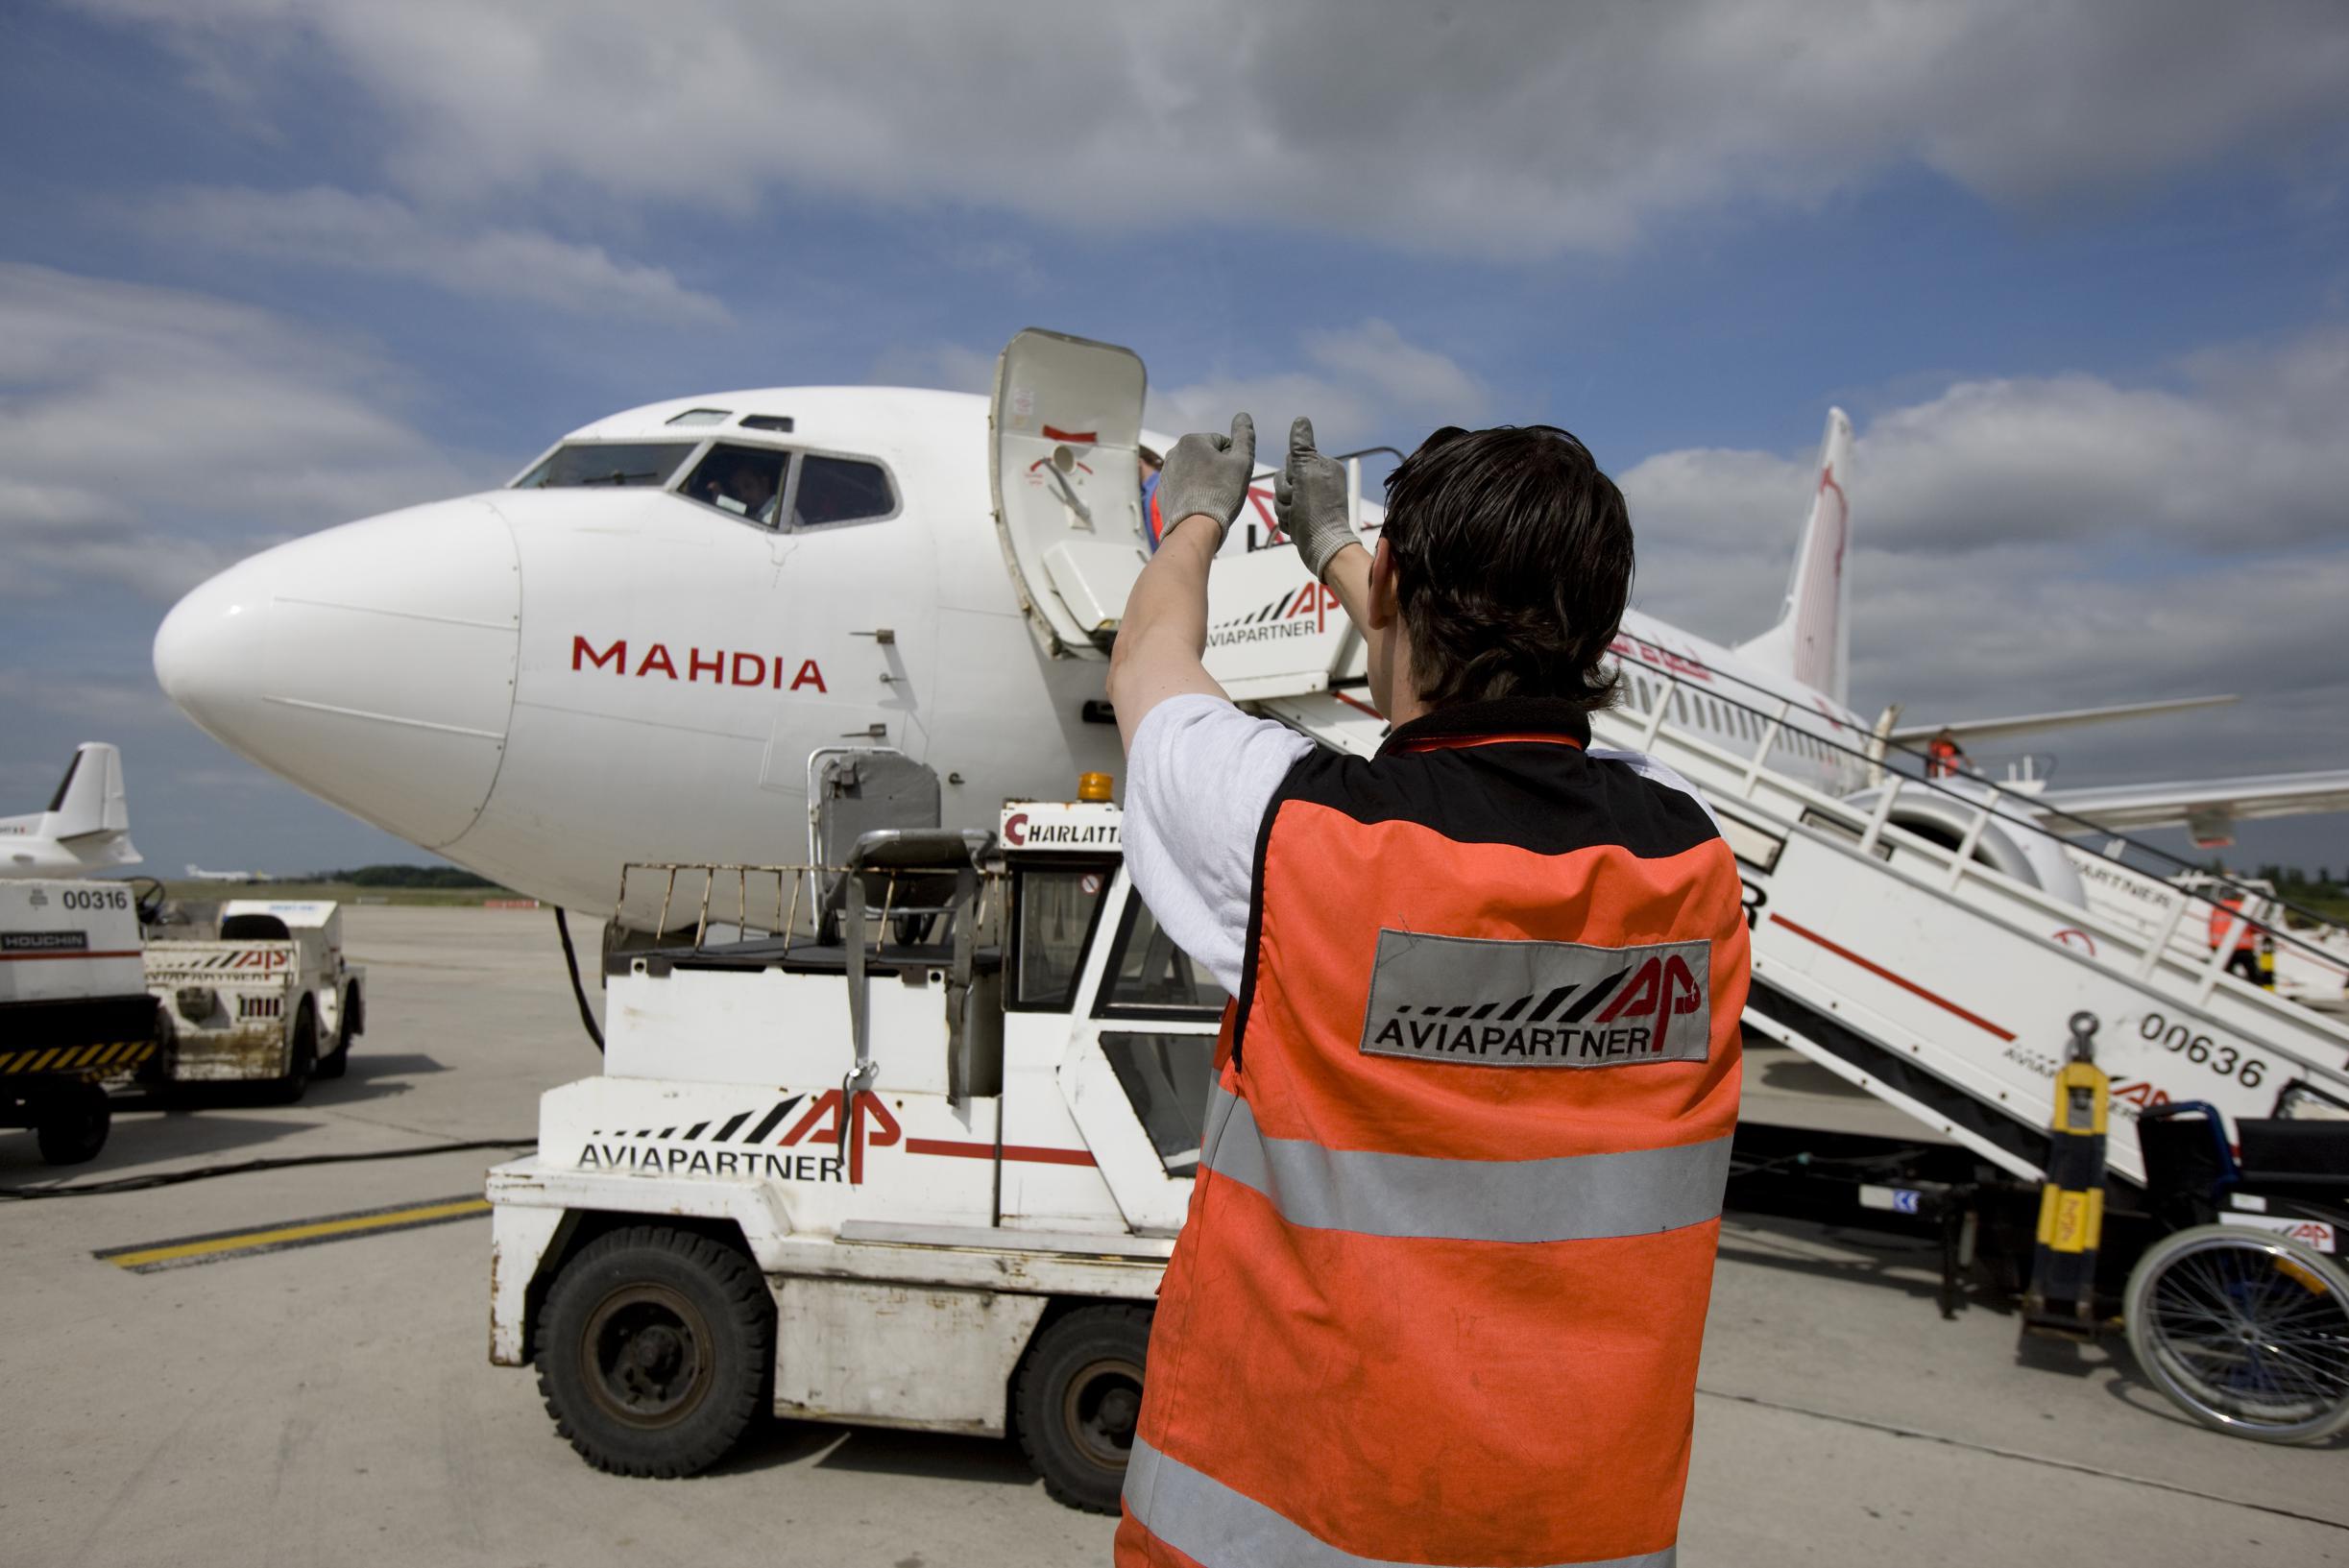 Aviapartner, a Belgium-based firm, emerges as a number one baggage handler in South Africa